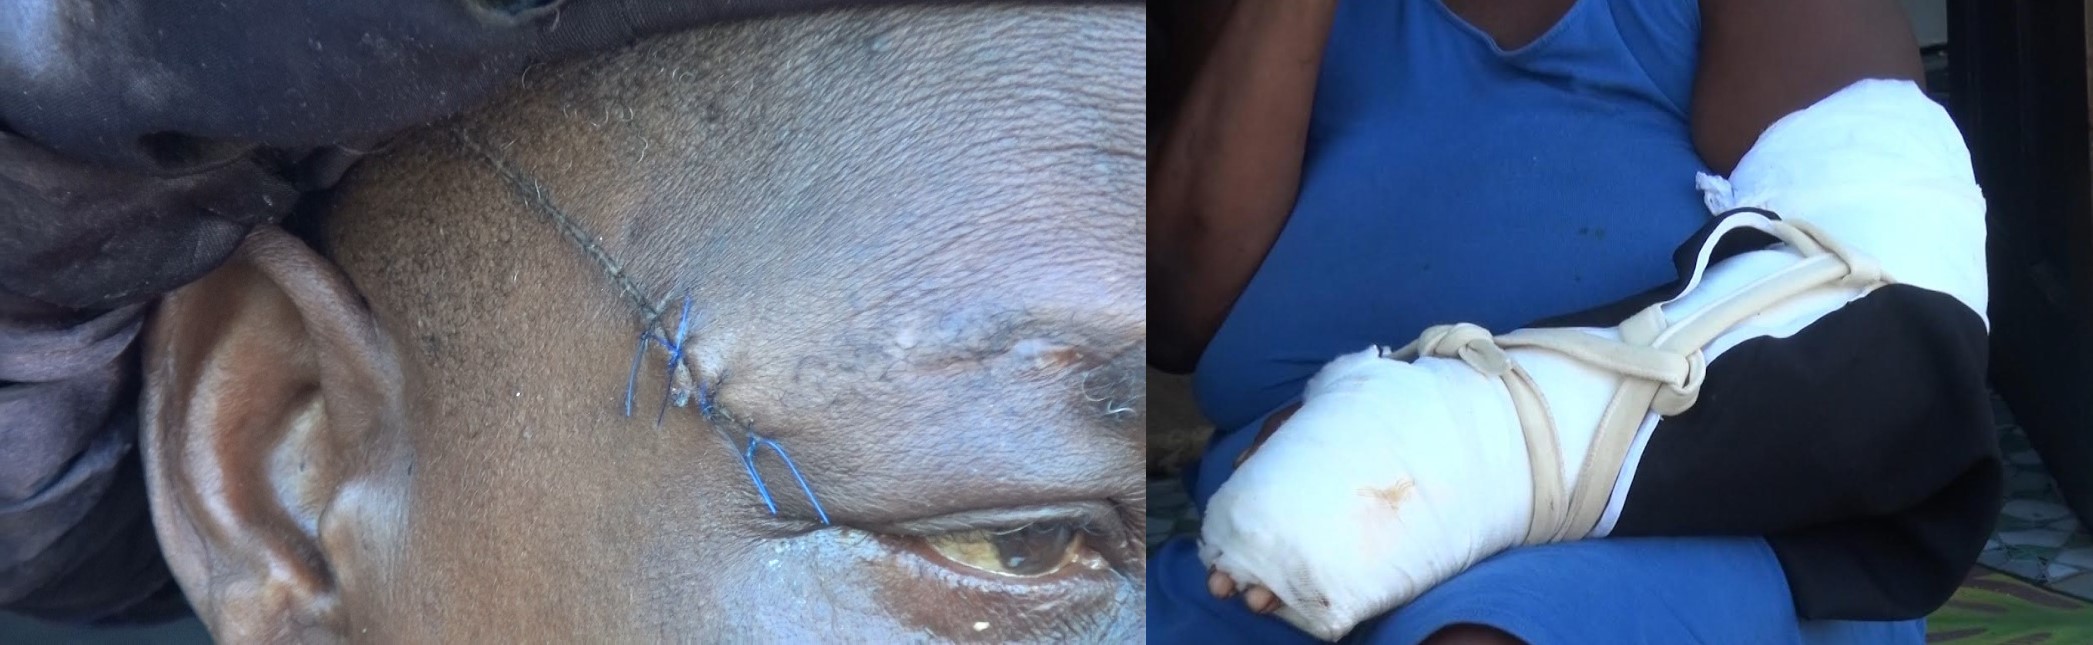 Photo collage of stitches and bandaged arm of Choiseul chopping victim.